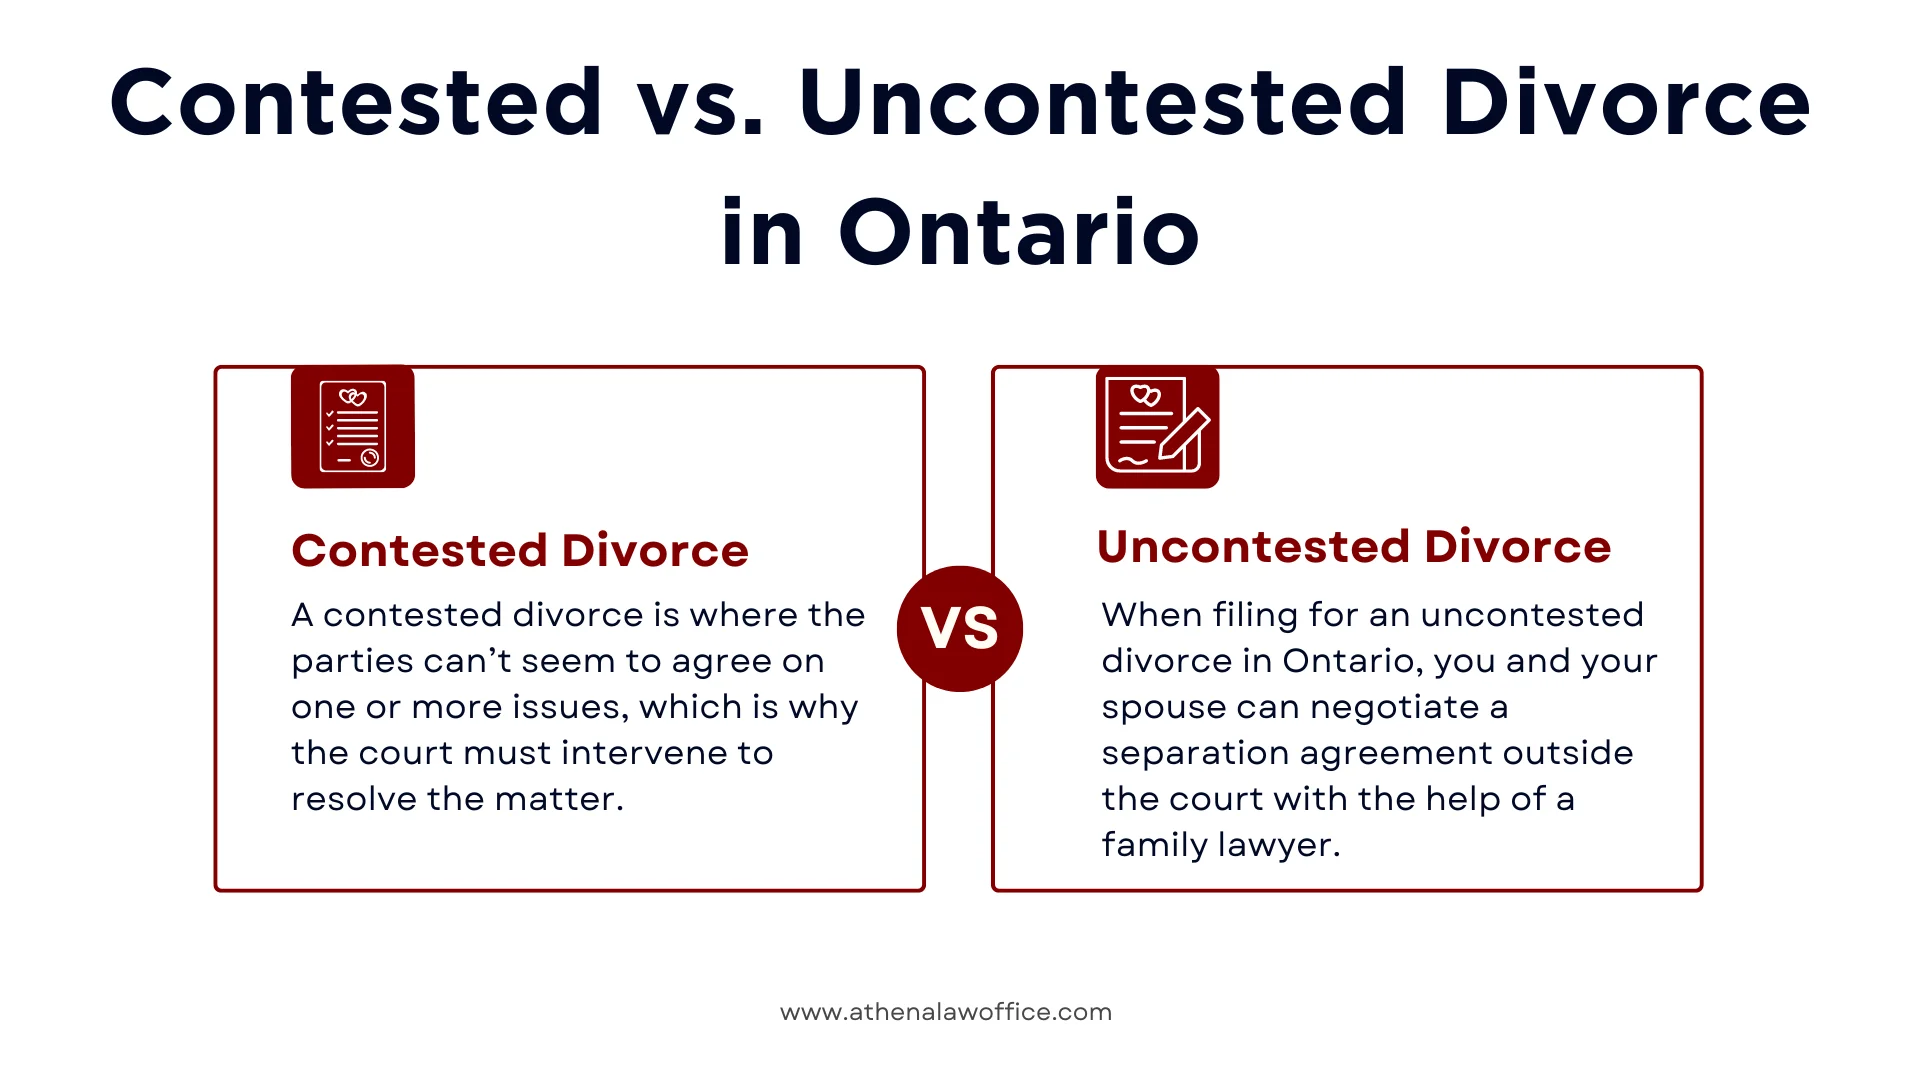 A post comparing contested vs uncontested divorce in Ontario